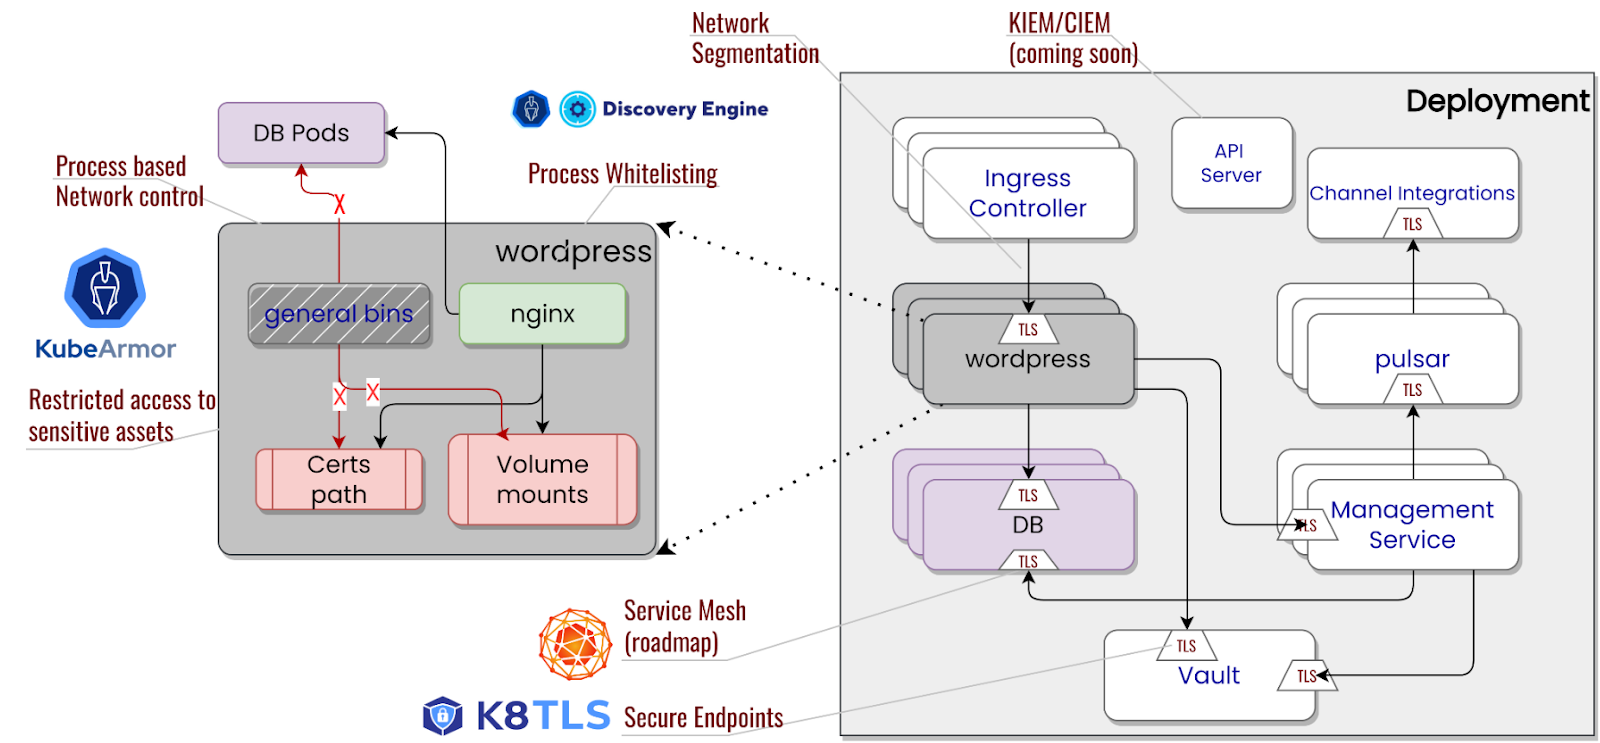 Diagram flow showing KubeArmor leveraging eBPF for enhanced visibility and observability